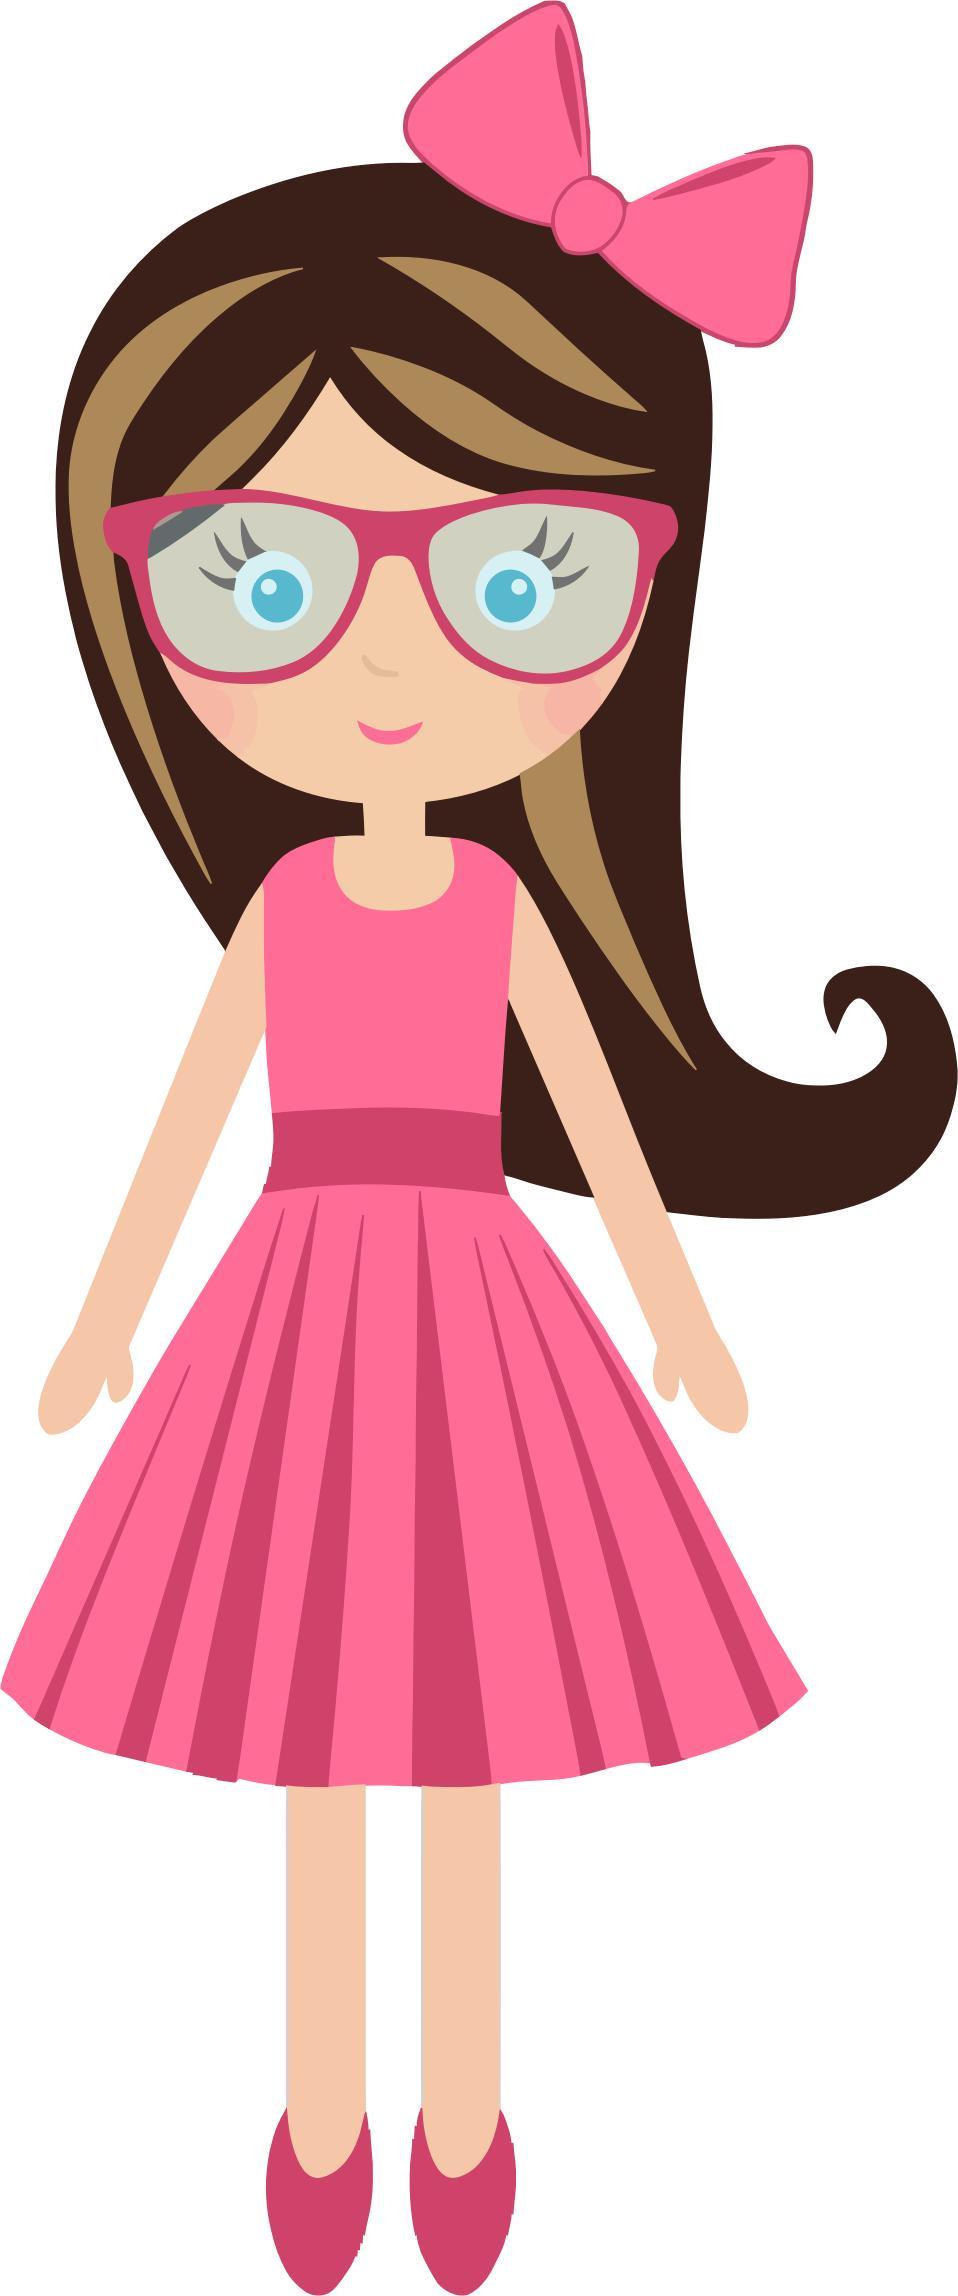 Cartoon Girl With Glasses png transparent